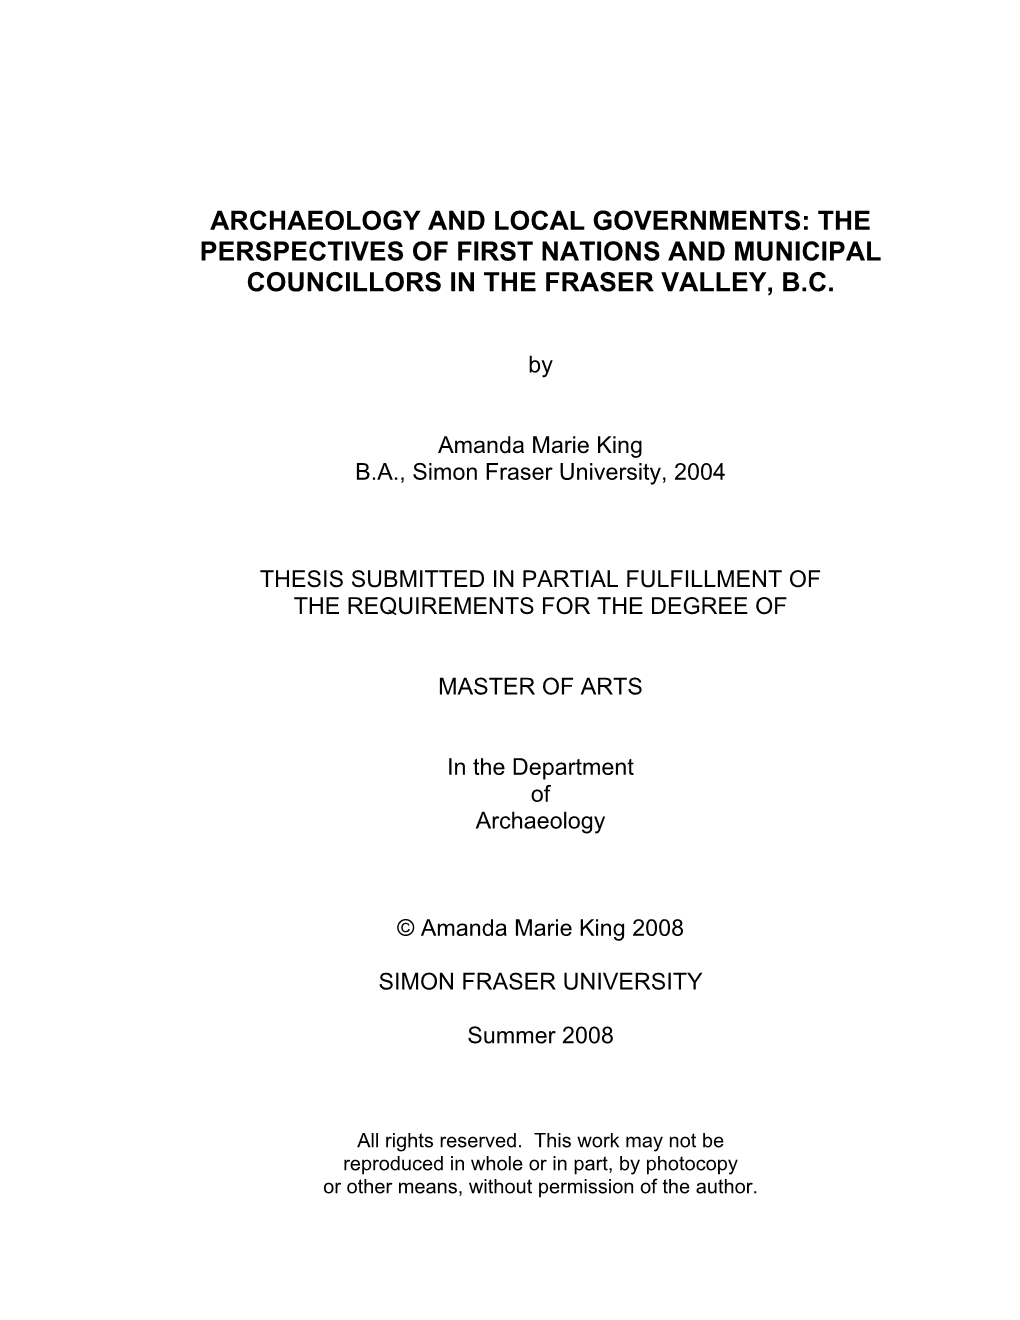 Public Opinion in Archaeology